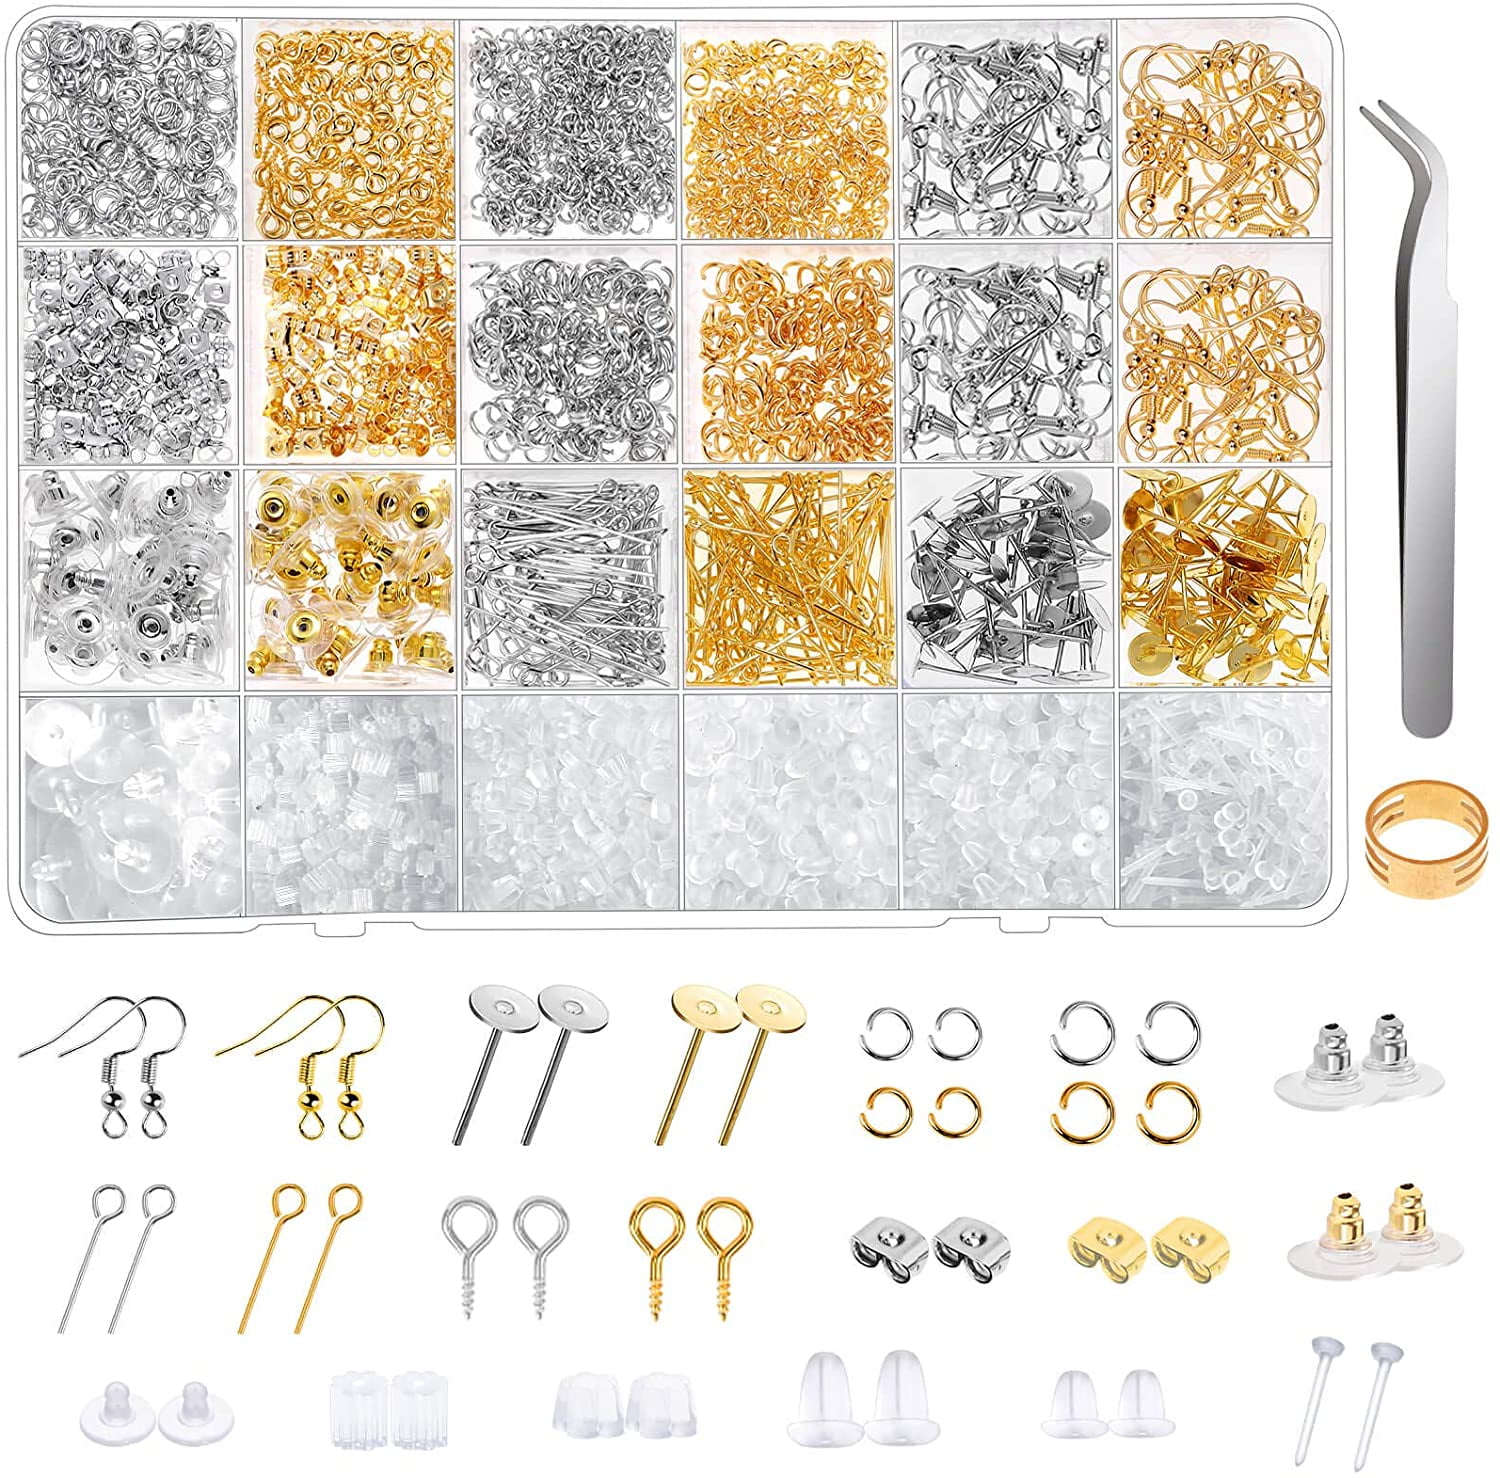  Incraftables Earring Making Kit (5 Colors). DIY Earring Kits  for Jewelry Making Supplies w/Hypoallergenic Earring Hooks, Backs, Display  Cards, Bags, Nose Pliers, Ring Opener & Tweezers for Adults